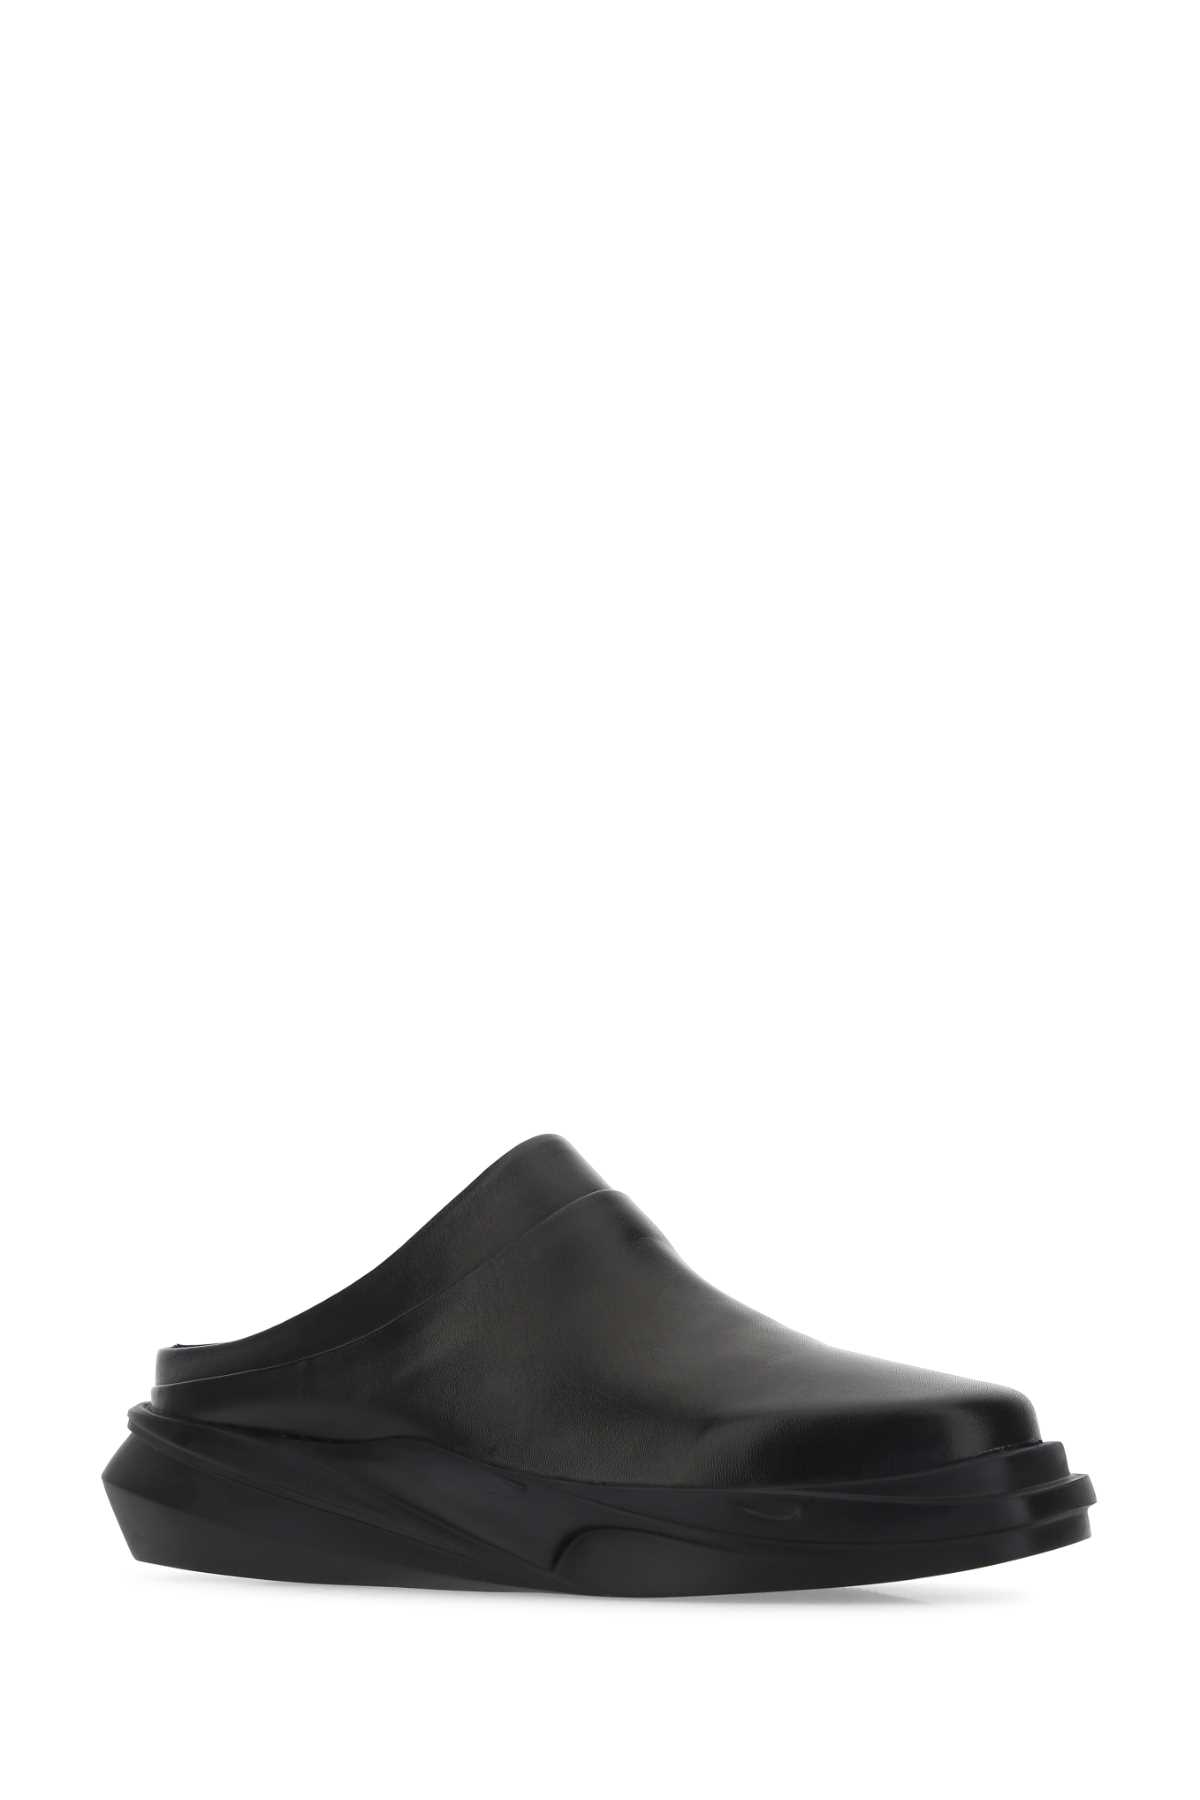 Shop Alyx Black Leather Mono Slippers In Blk0001